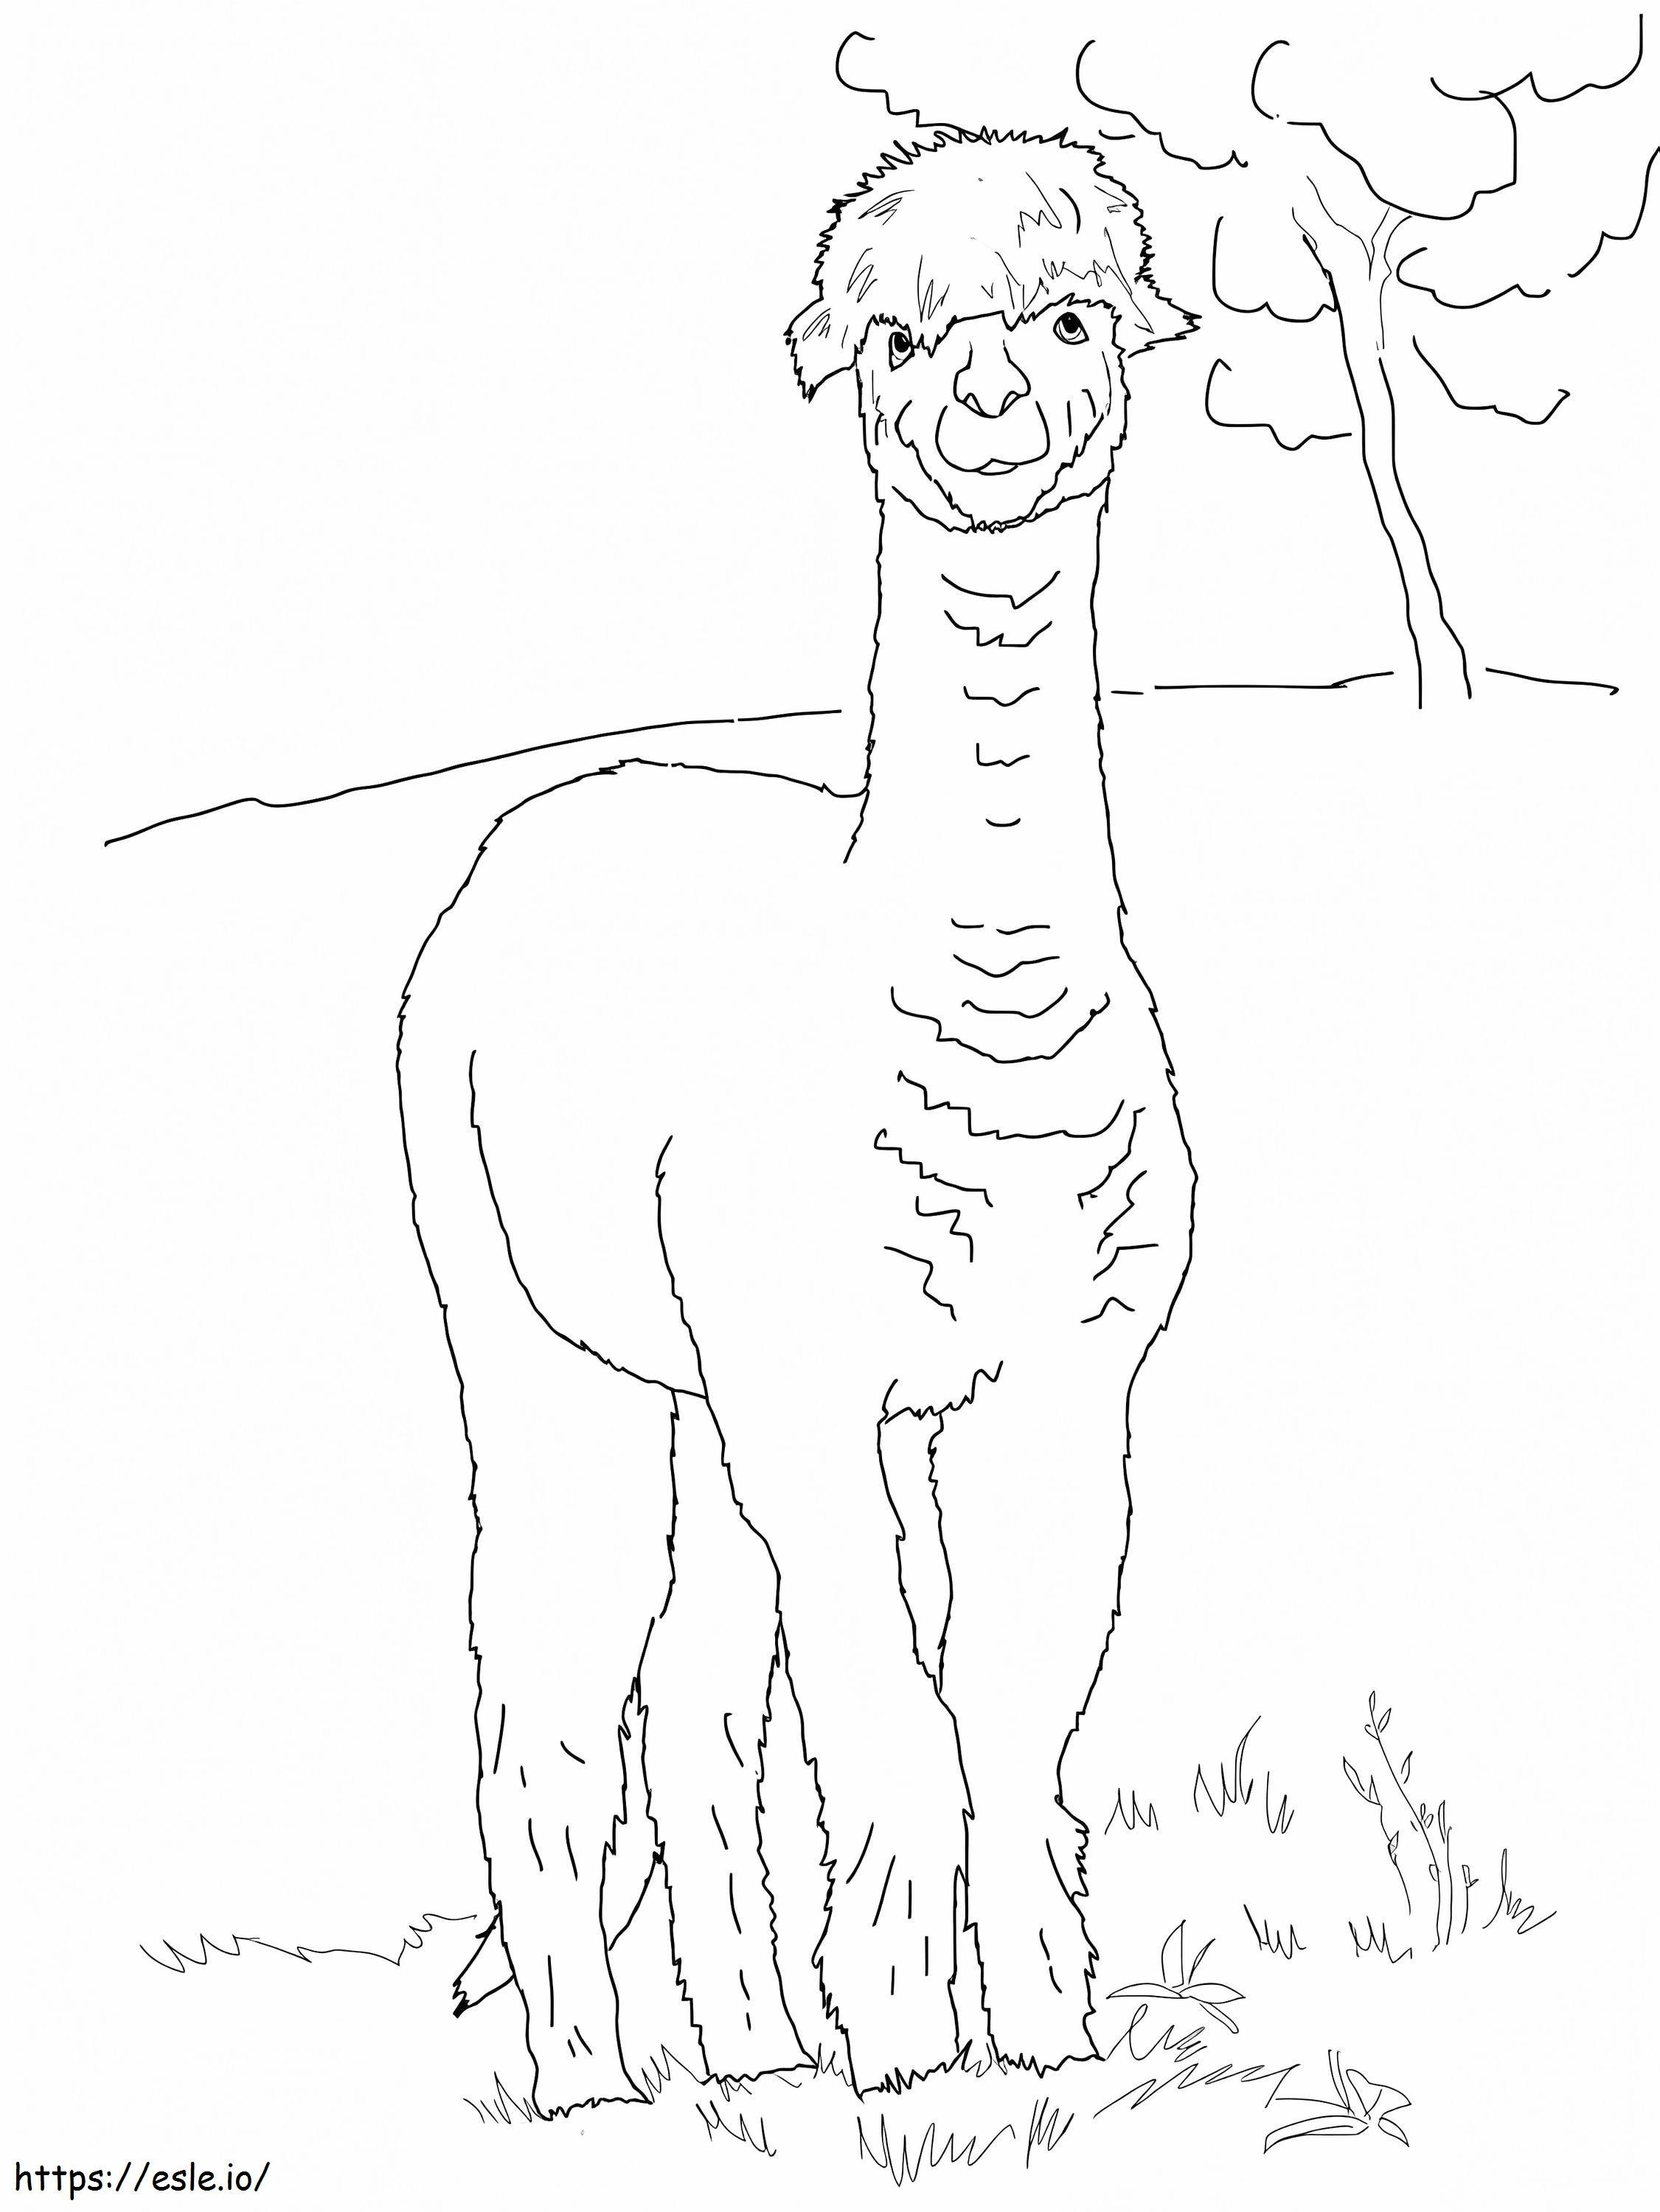 Alpaca In The Wild coloring page